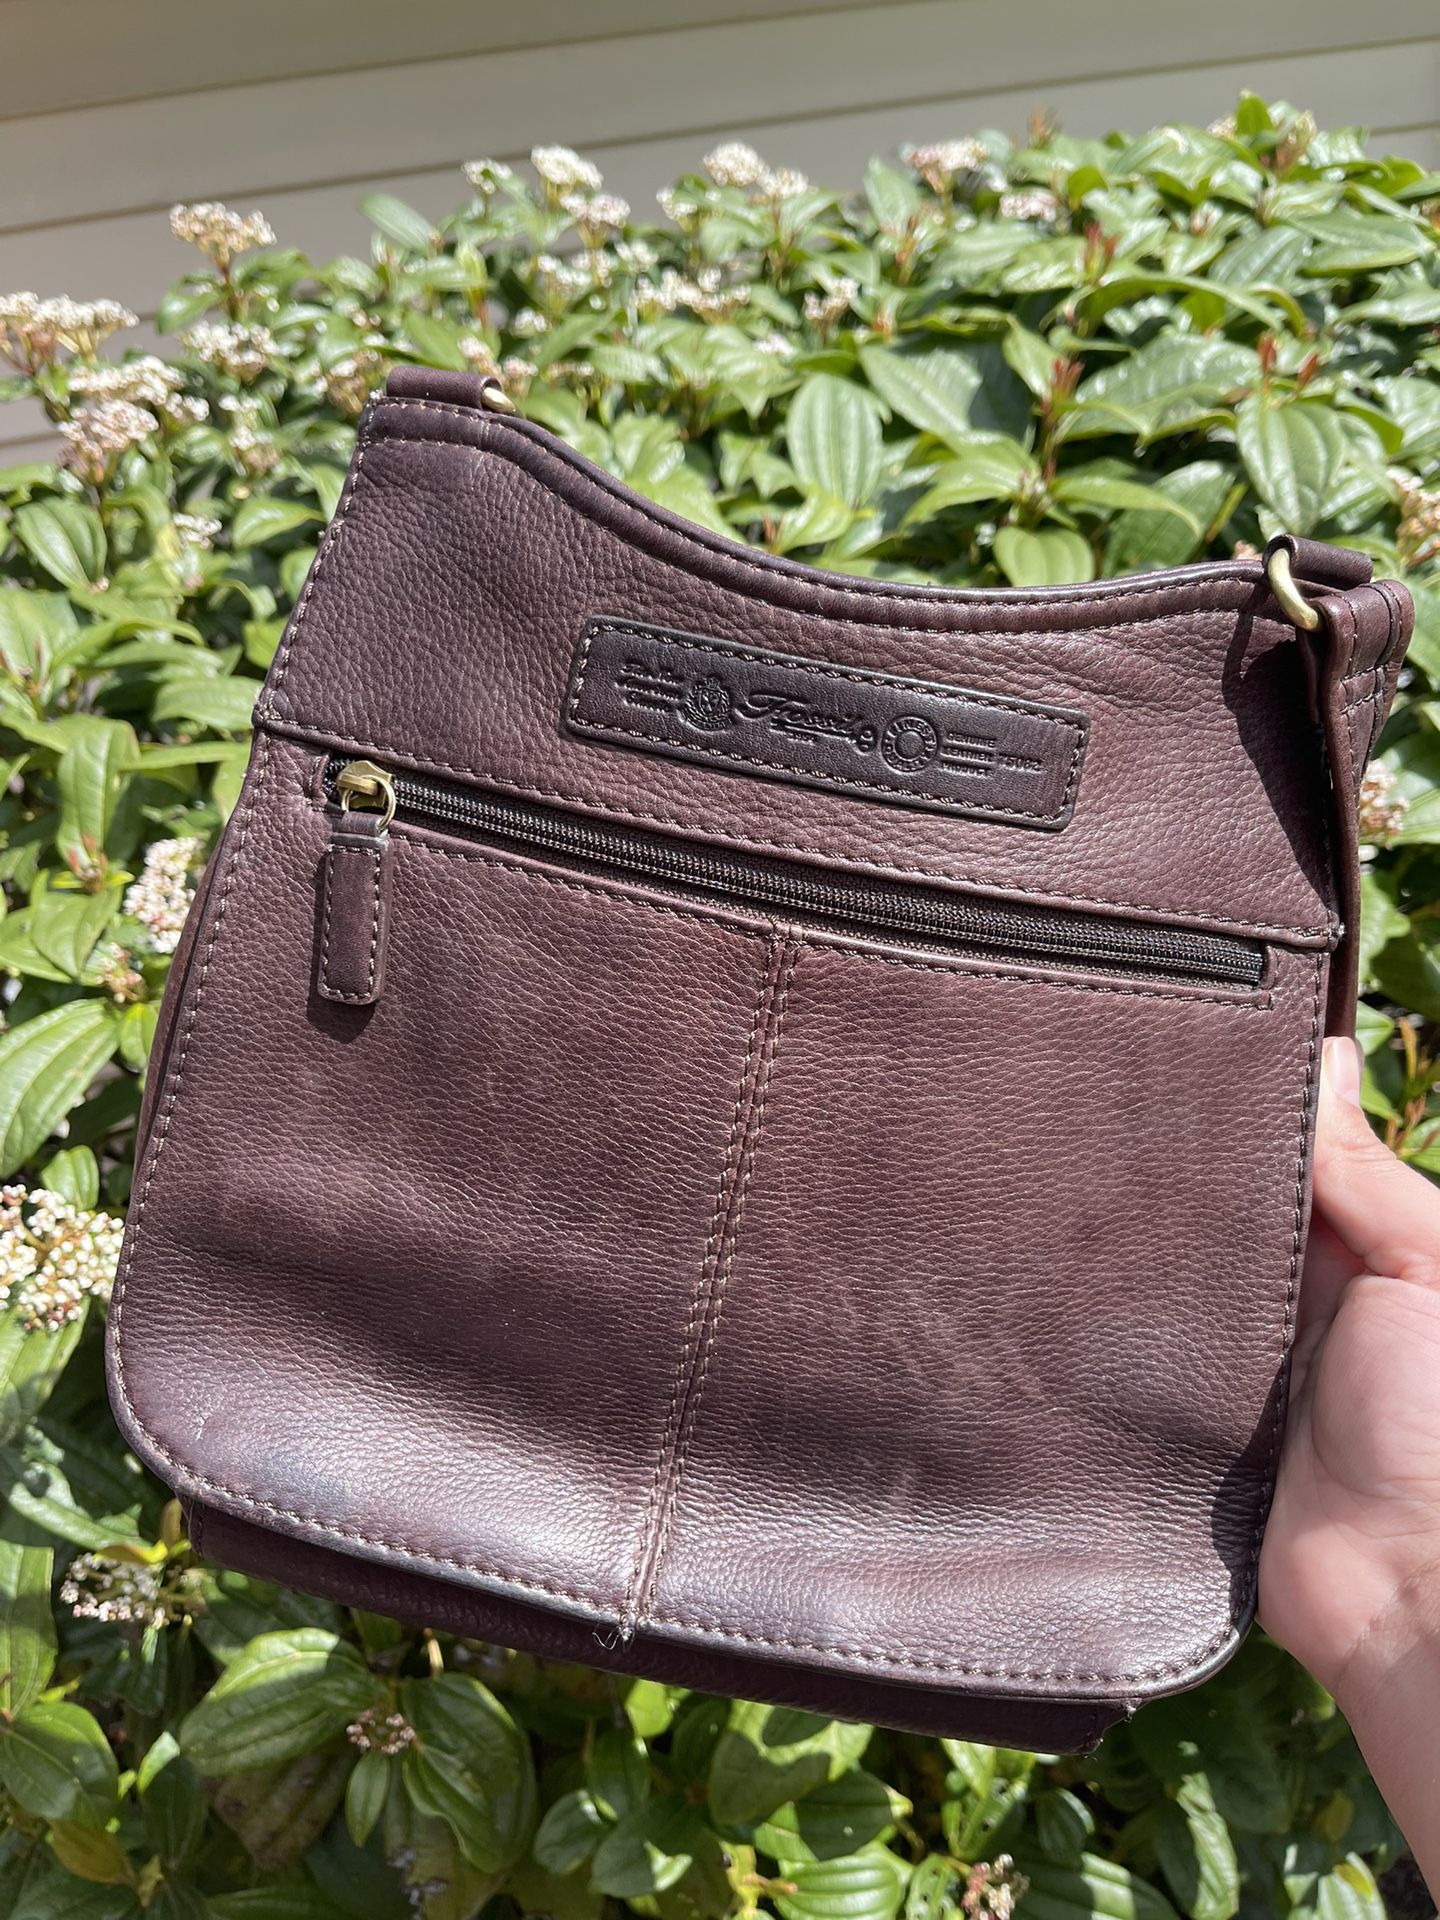 Fossil Brown Leather Messenger Bag - 75082